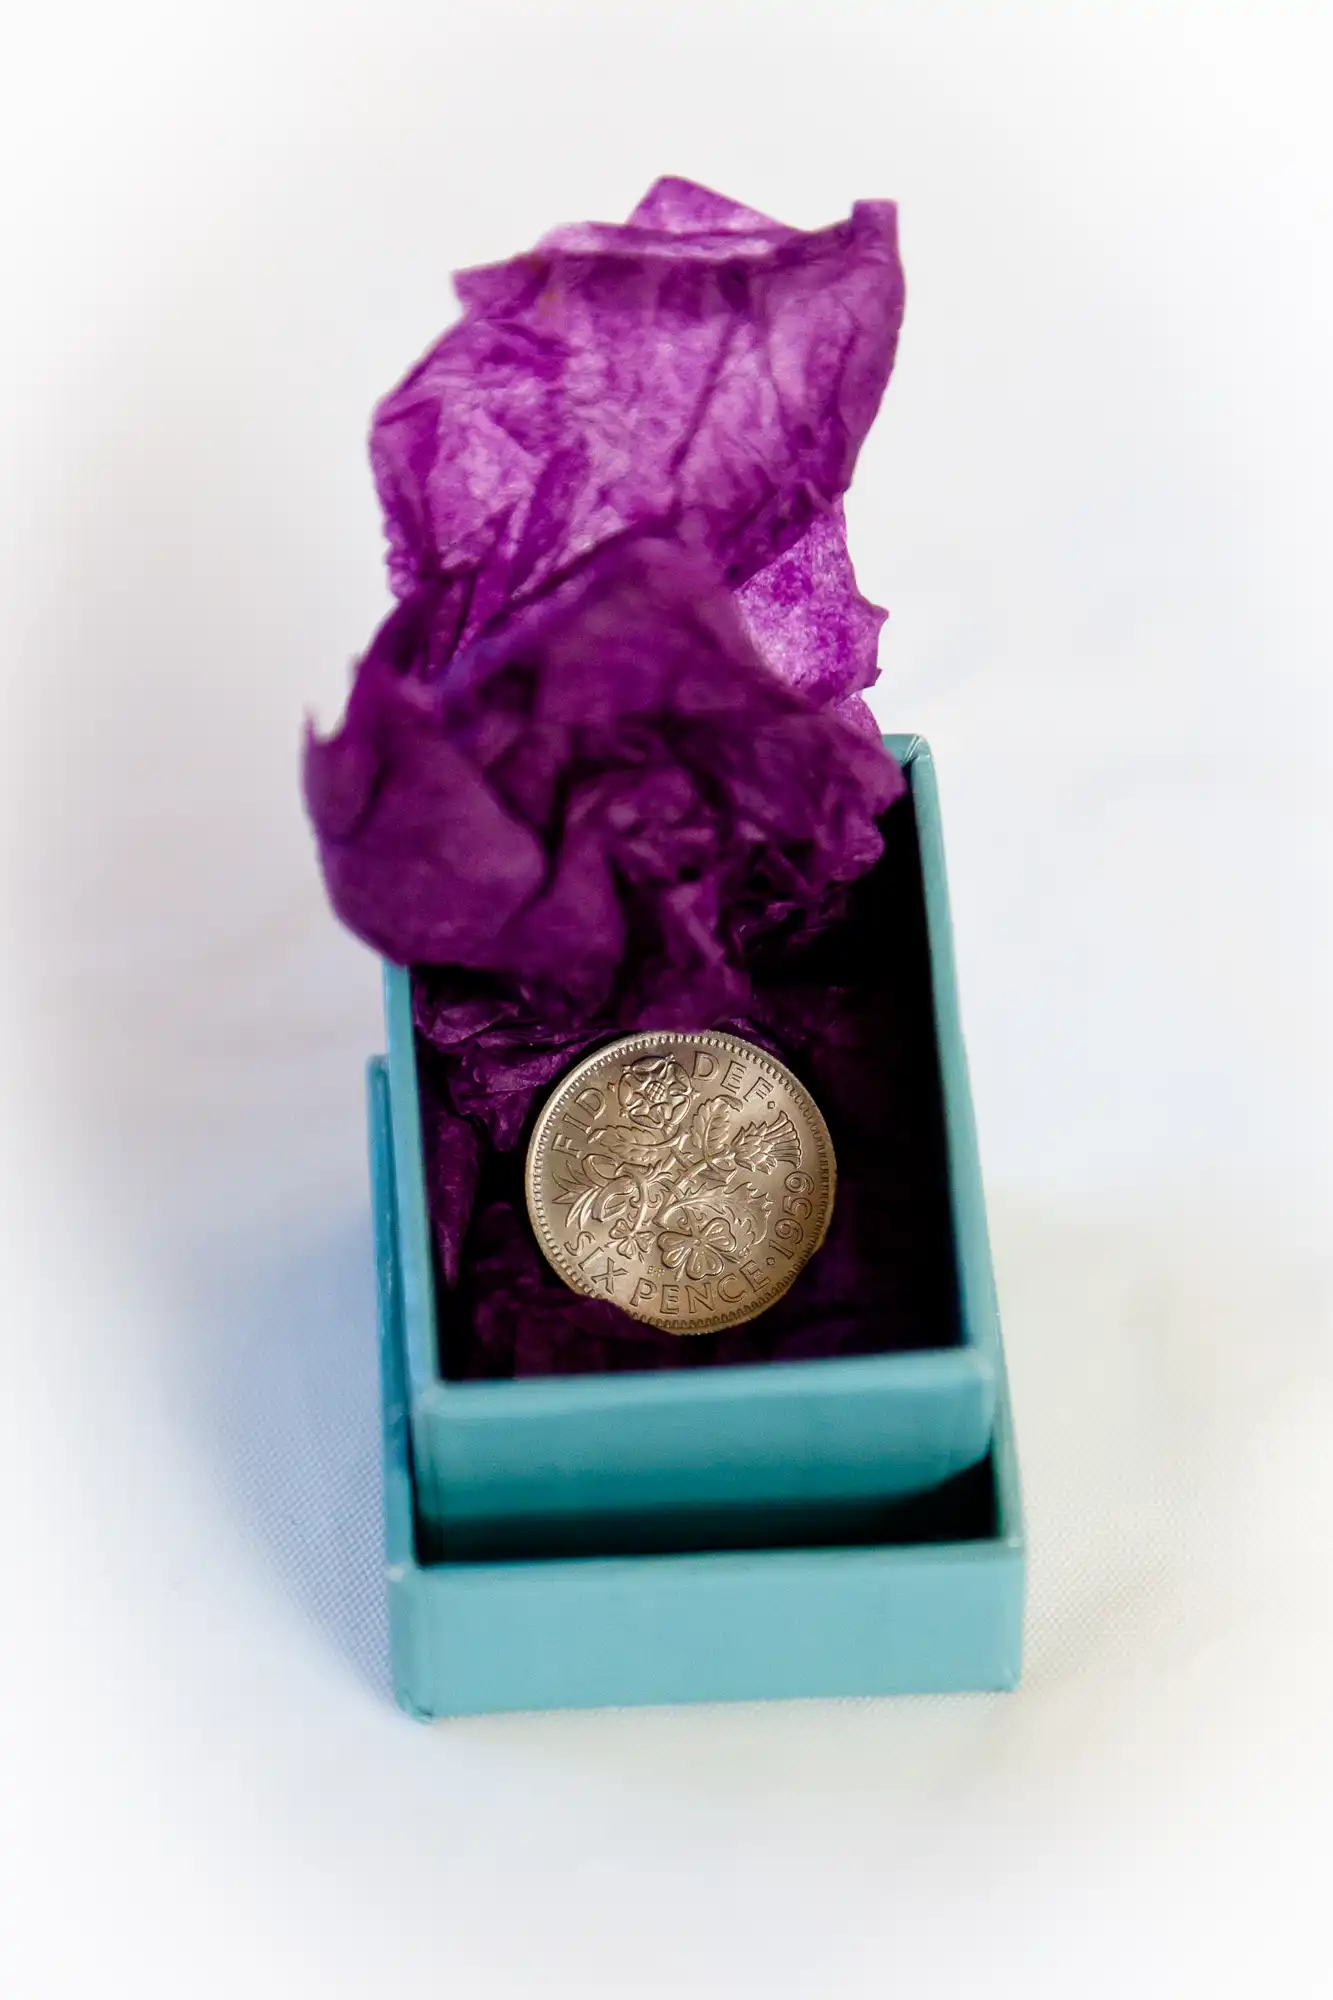 A british one-pound coin rests on purple tissue paper inside a small turquoise gift box.